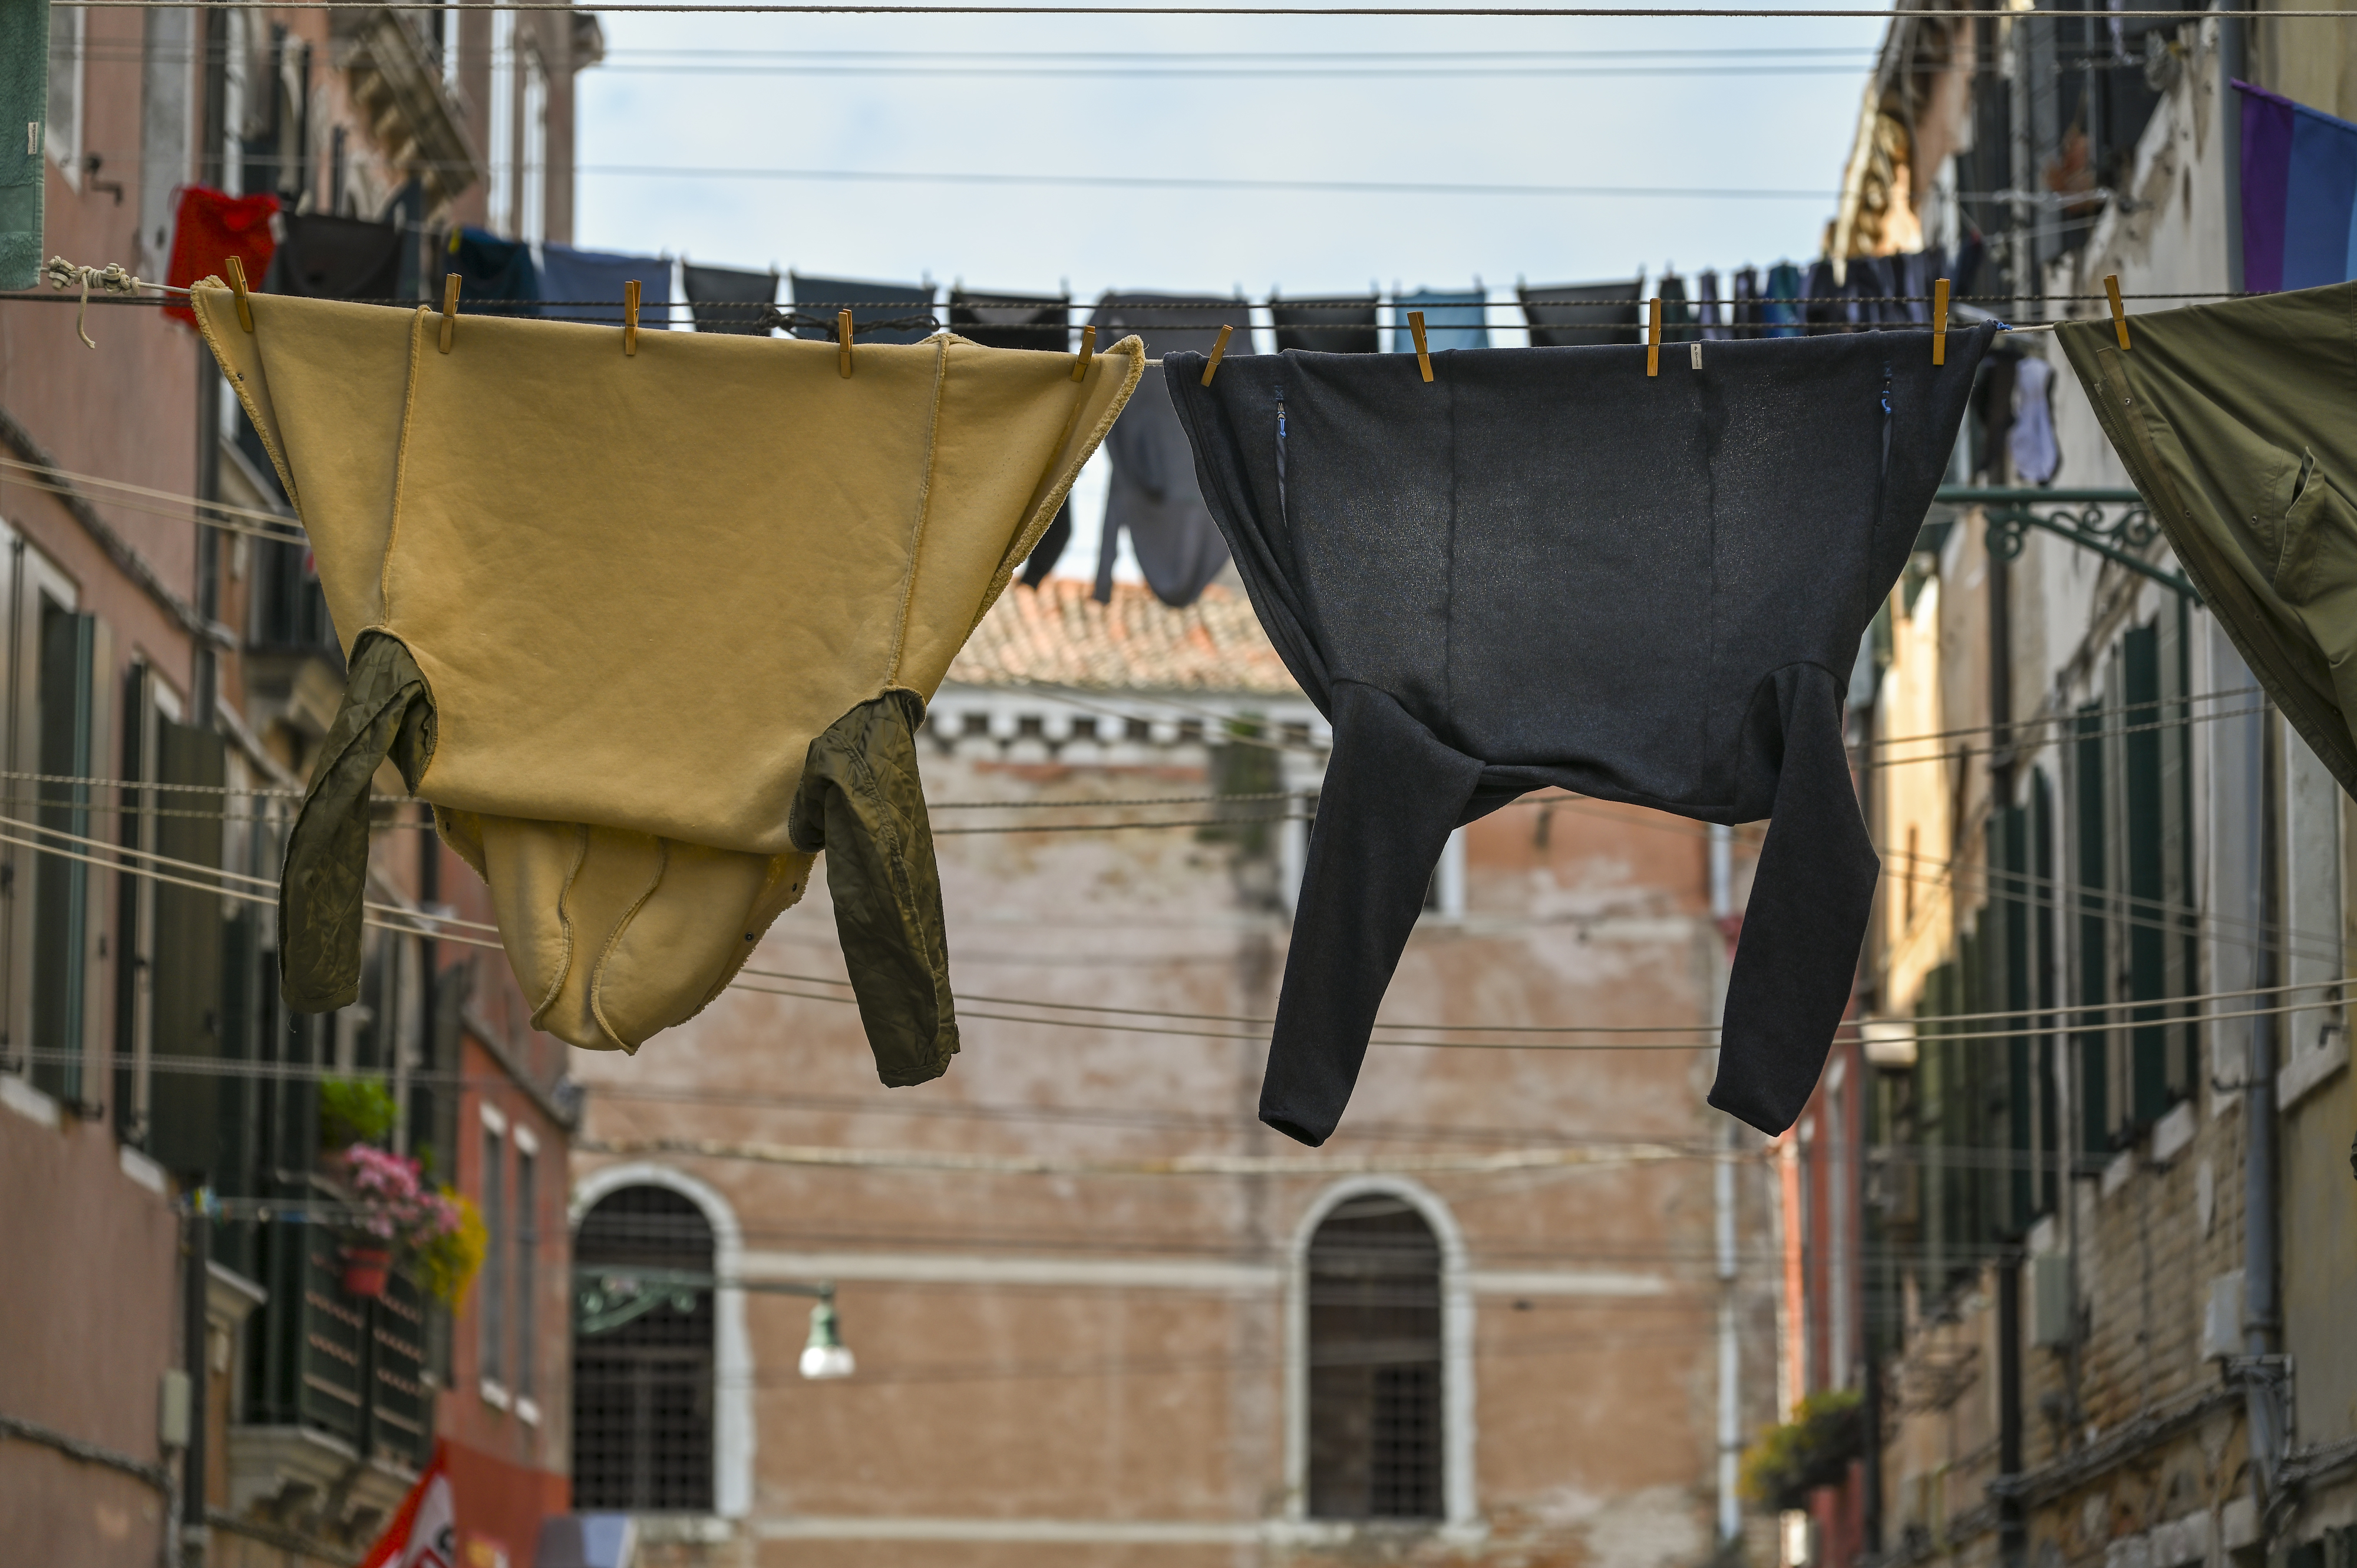 clothes drying on clothes lines hung up between buildings